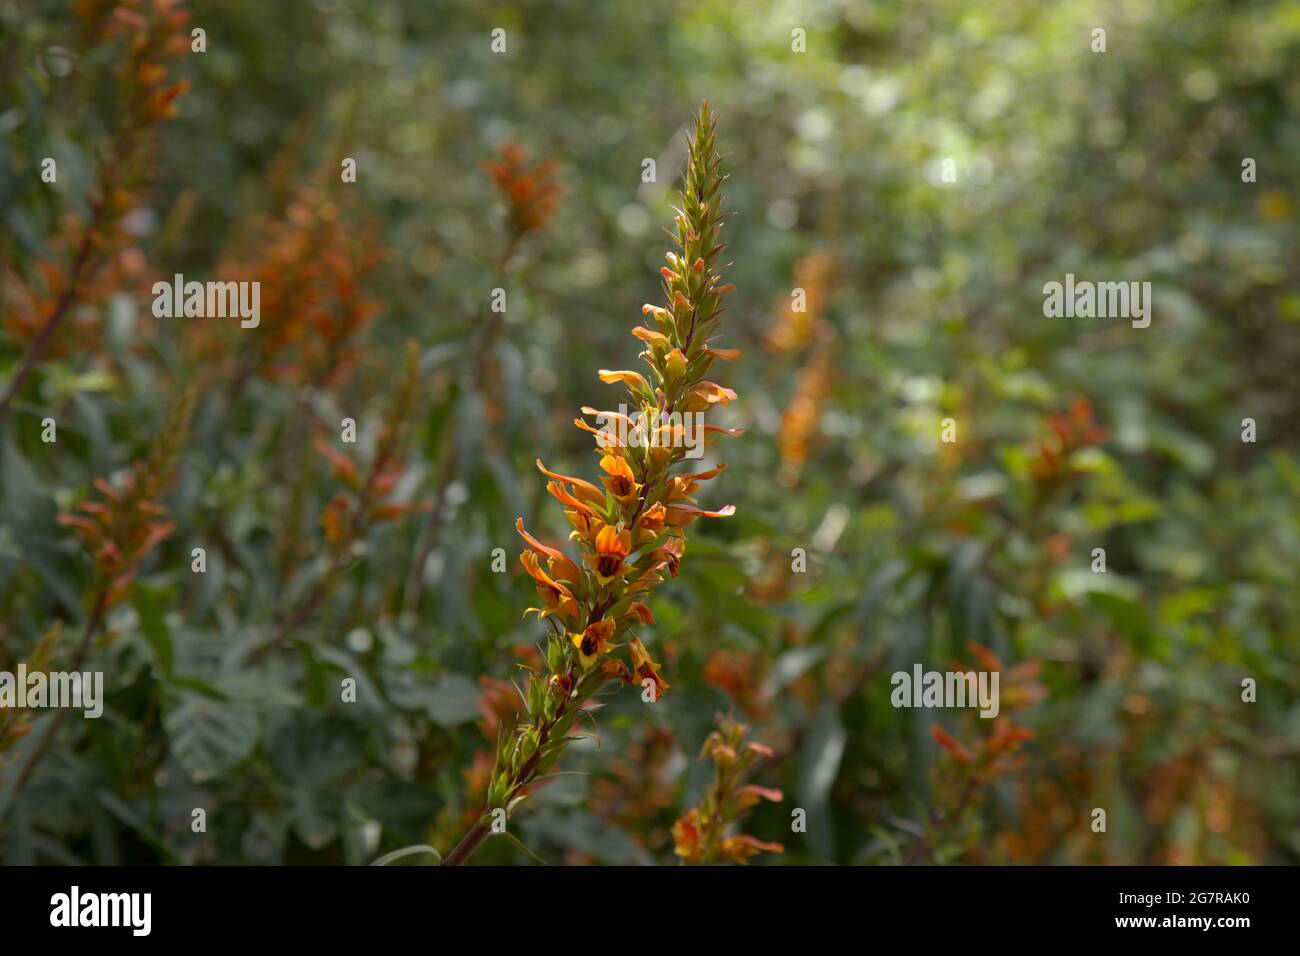 Flora of Gran Canaria - orange and red flowers of Isoplexis canariensis, plant endemic to Canary Islands, natural macro floral background Stock Photo